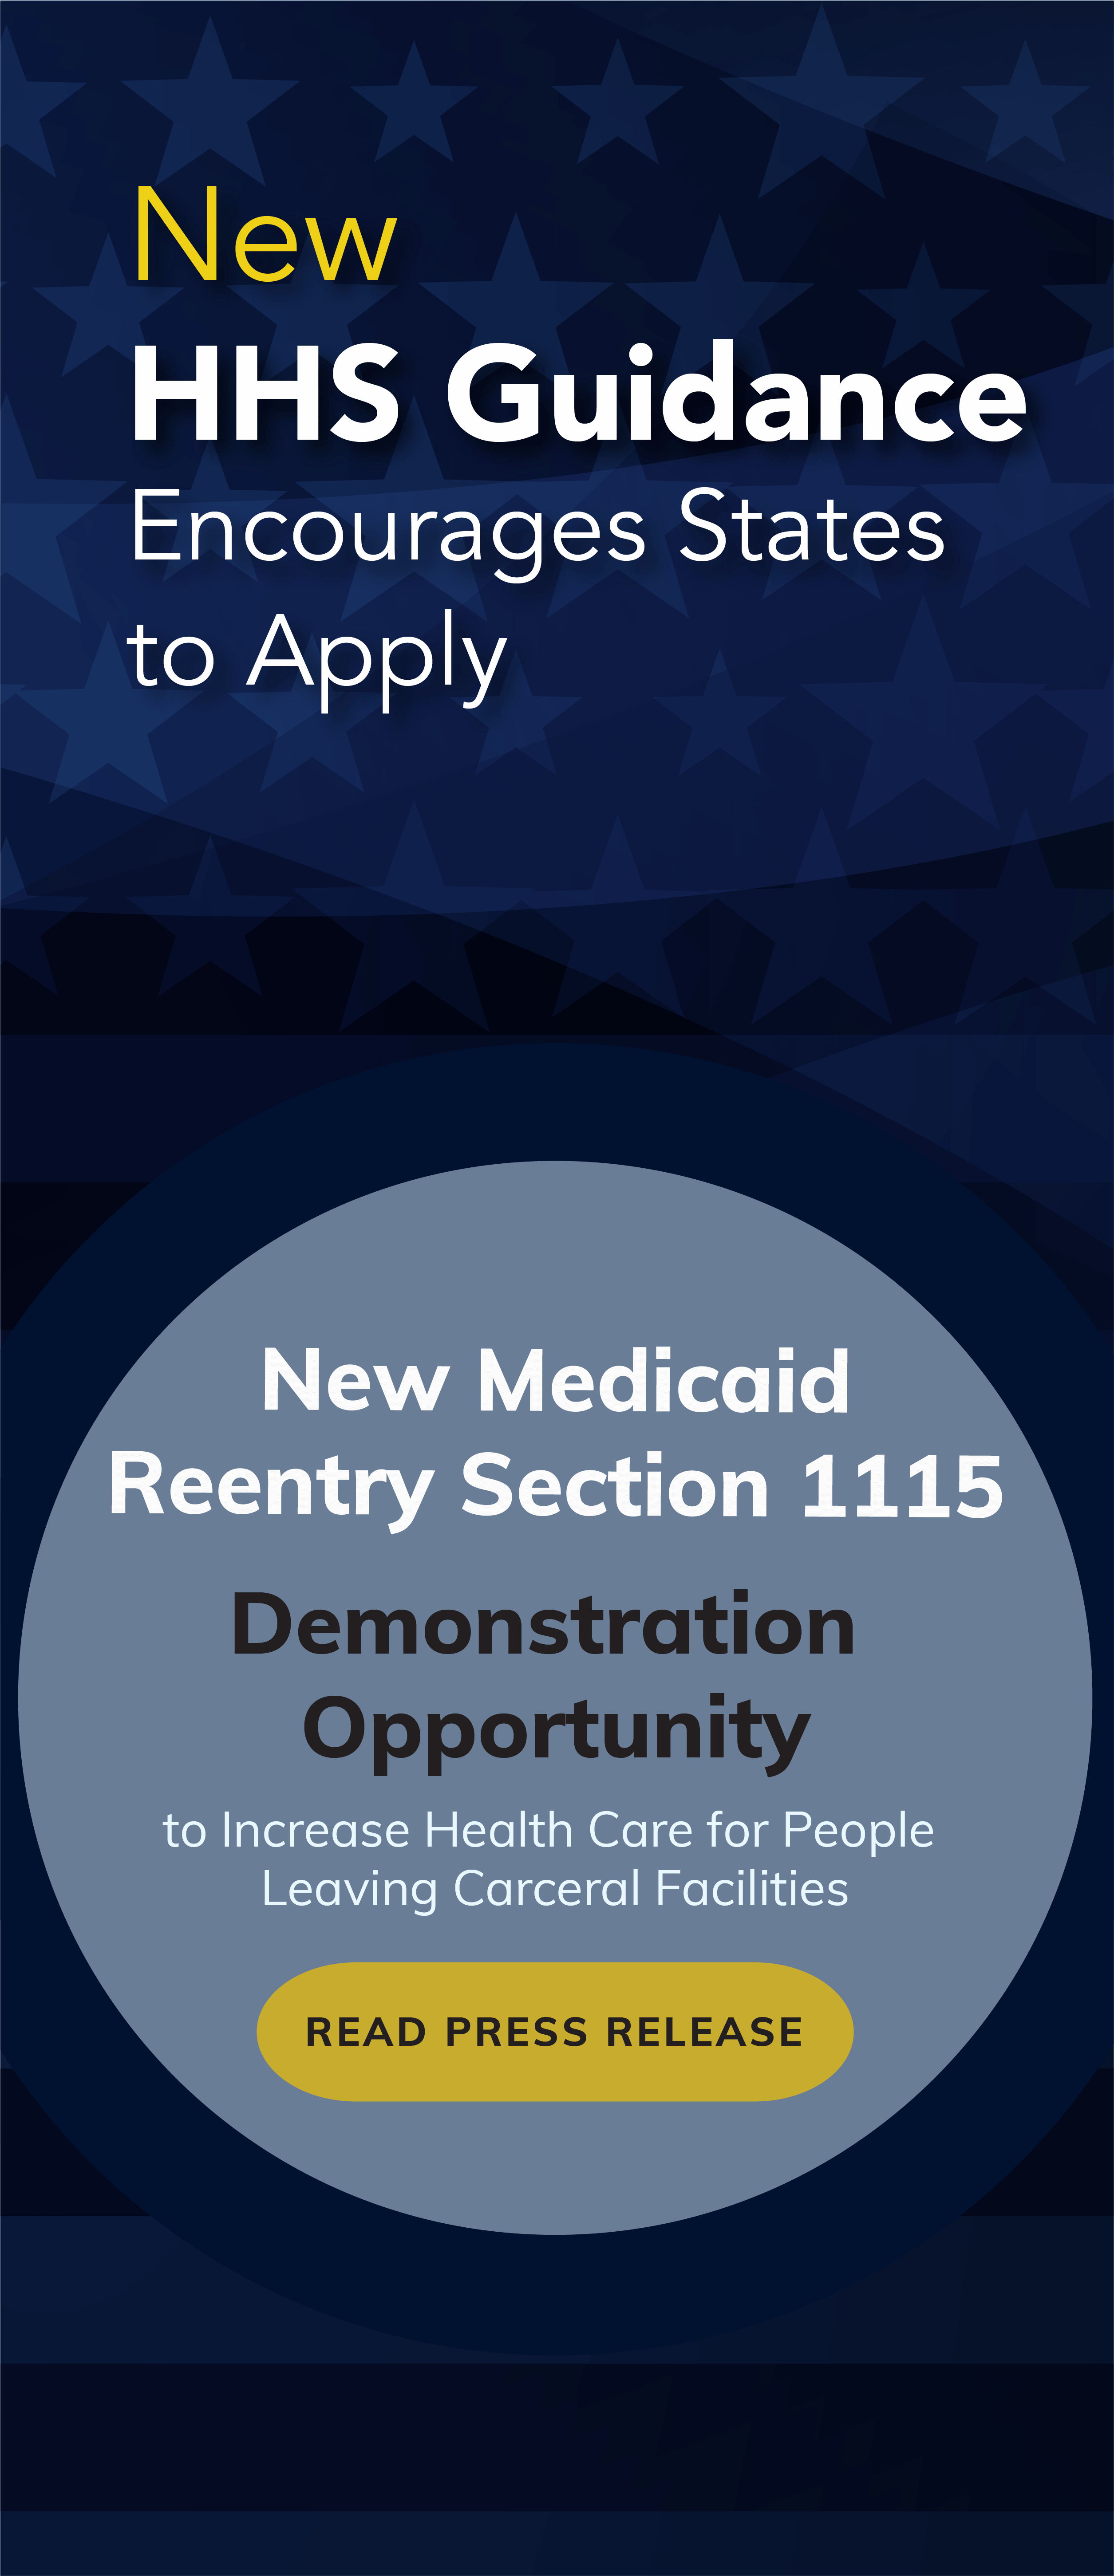 New HHS Guidance Encourages States to Apply - New Medicaid Reentry Section 1115 Demonstration Opportunity. Read Press Release